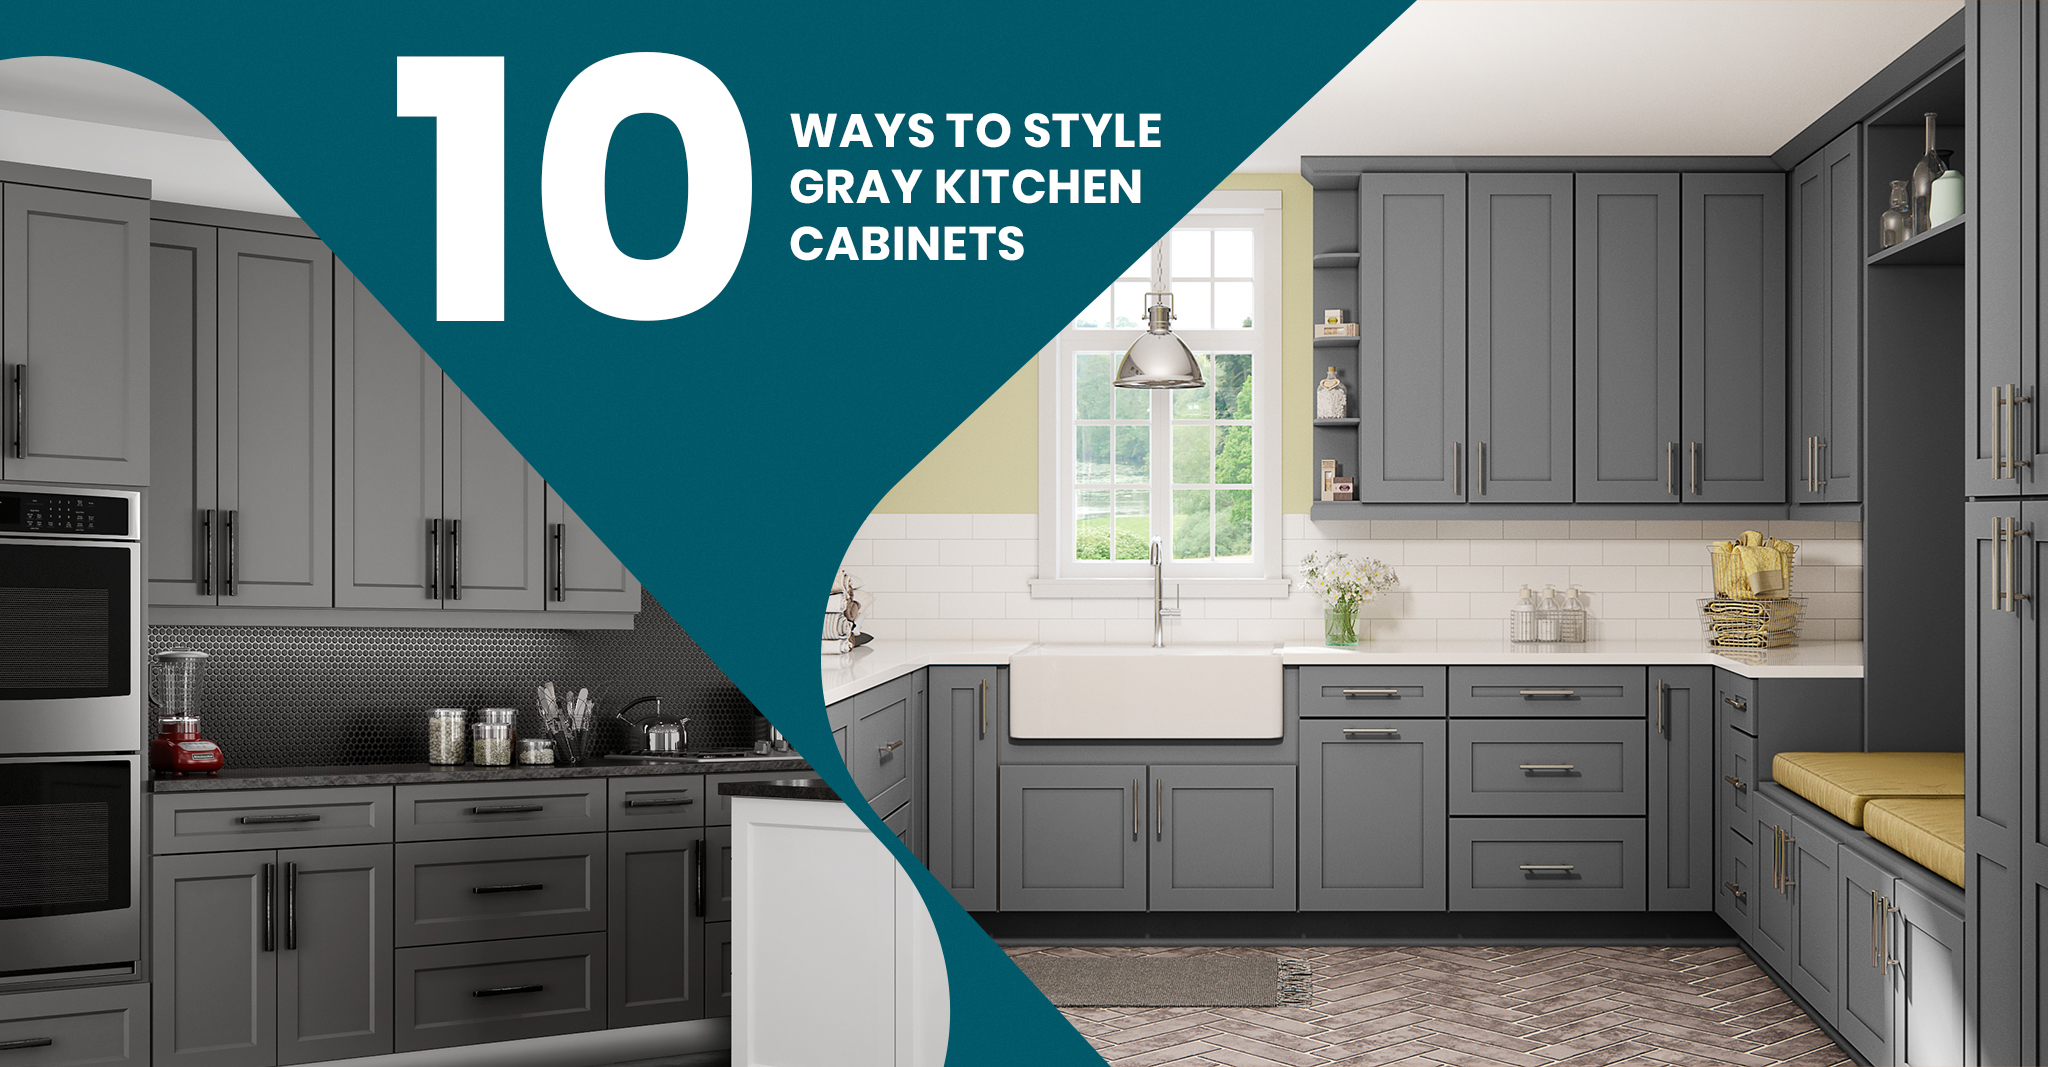 10 Ways to Style Gray Kitchen Cabinets